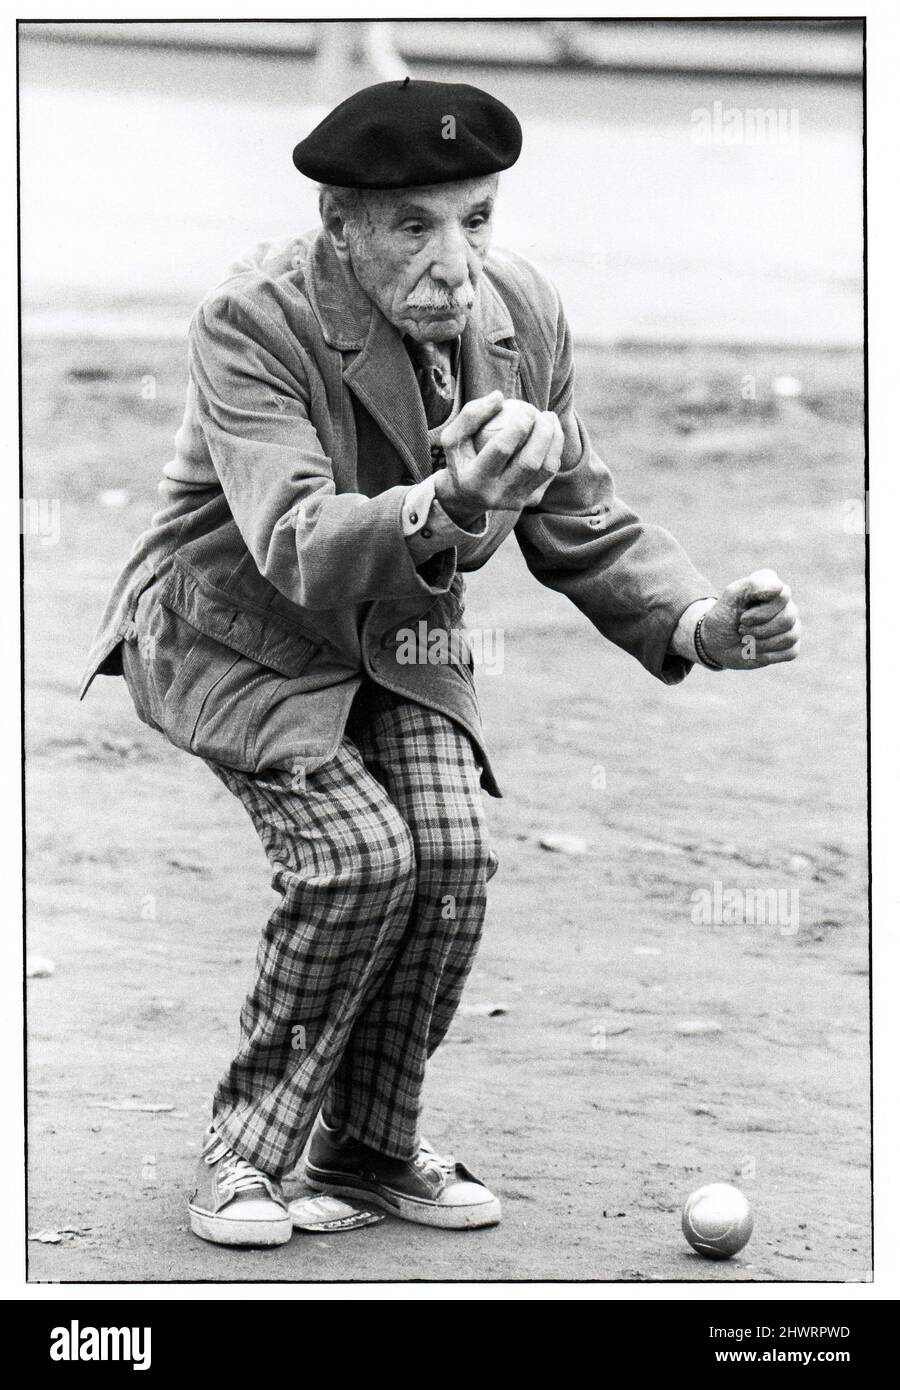 A very dapper older man, likely Italian American, sizes up his next move in a bocce game in Midtown Manhattan, New York City. 1978. Stock Photo